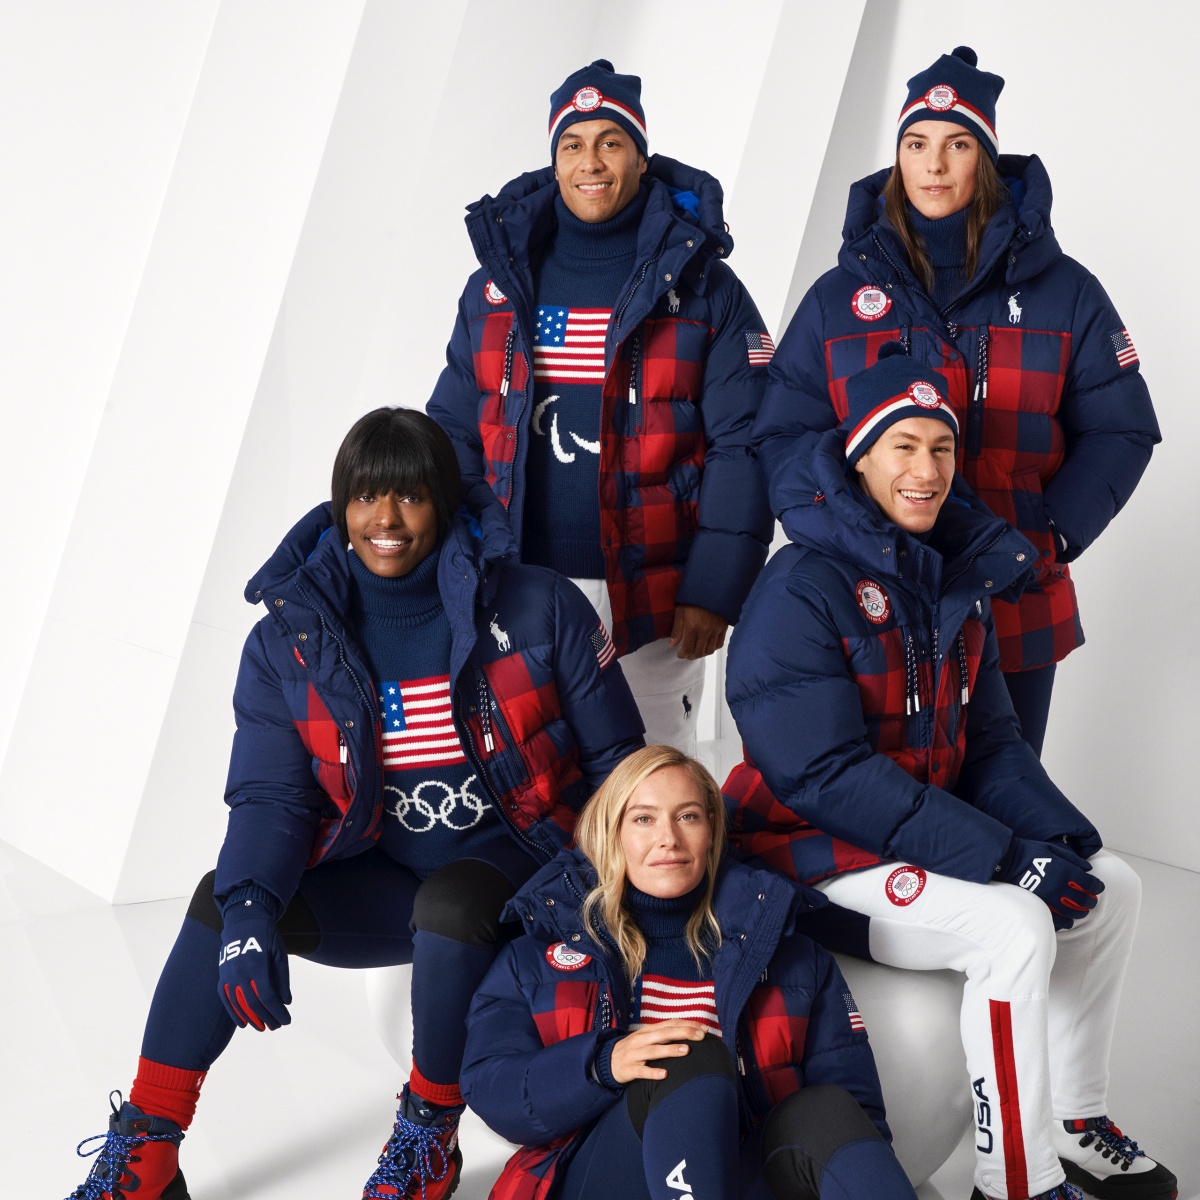 Team USA's 2022 Olympics Closing Ceremony Outfits Are Here See the